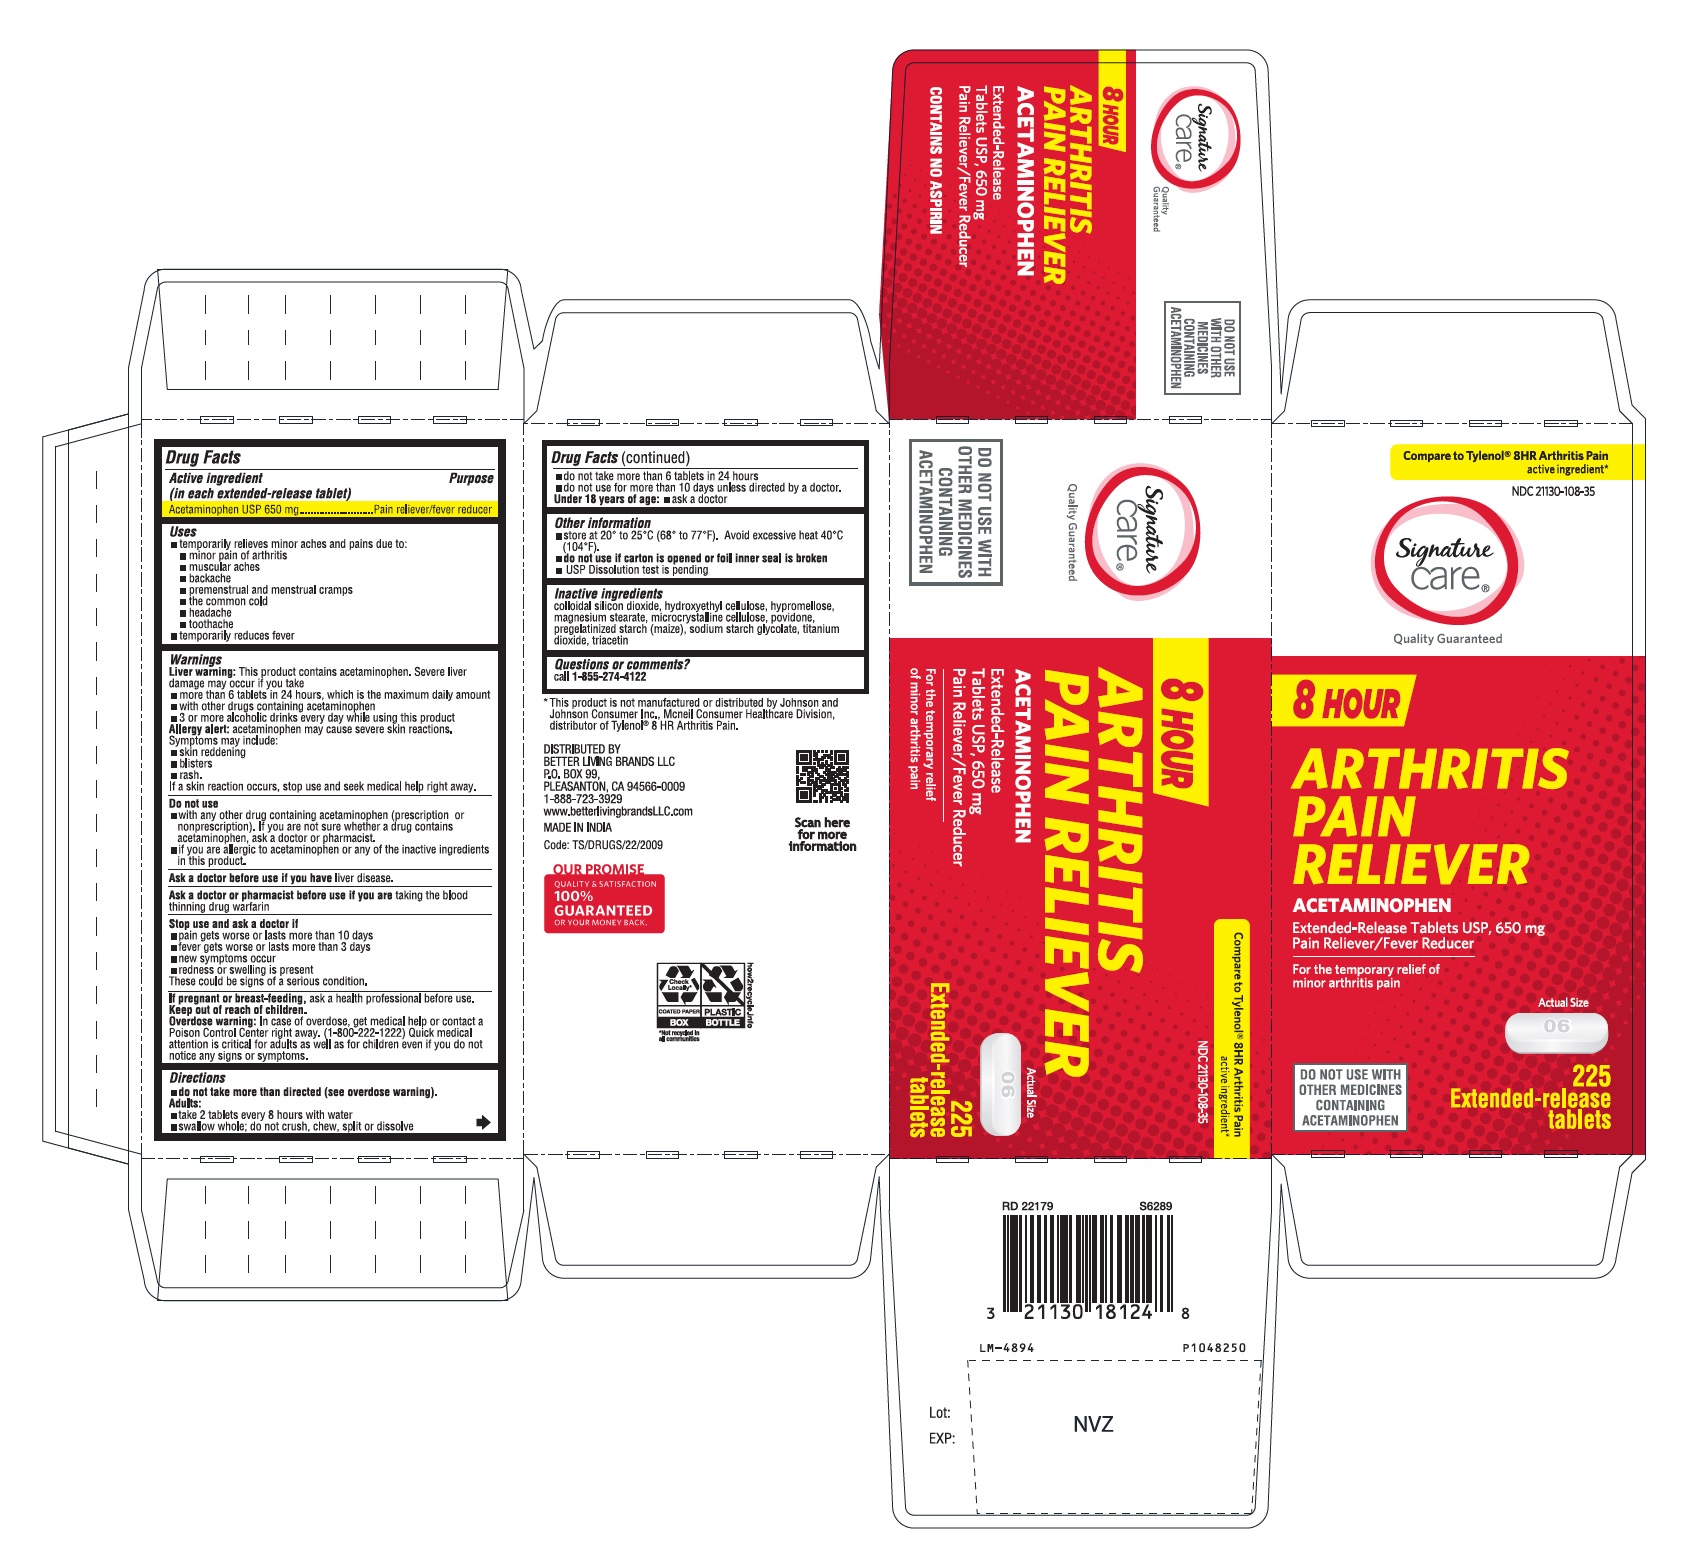 PACKAGE LABEL-PRINCIPAL DISPLAY PANEL - 650 mg (24 Tablets Container Carton)